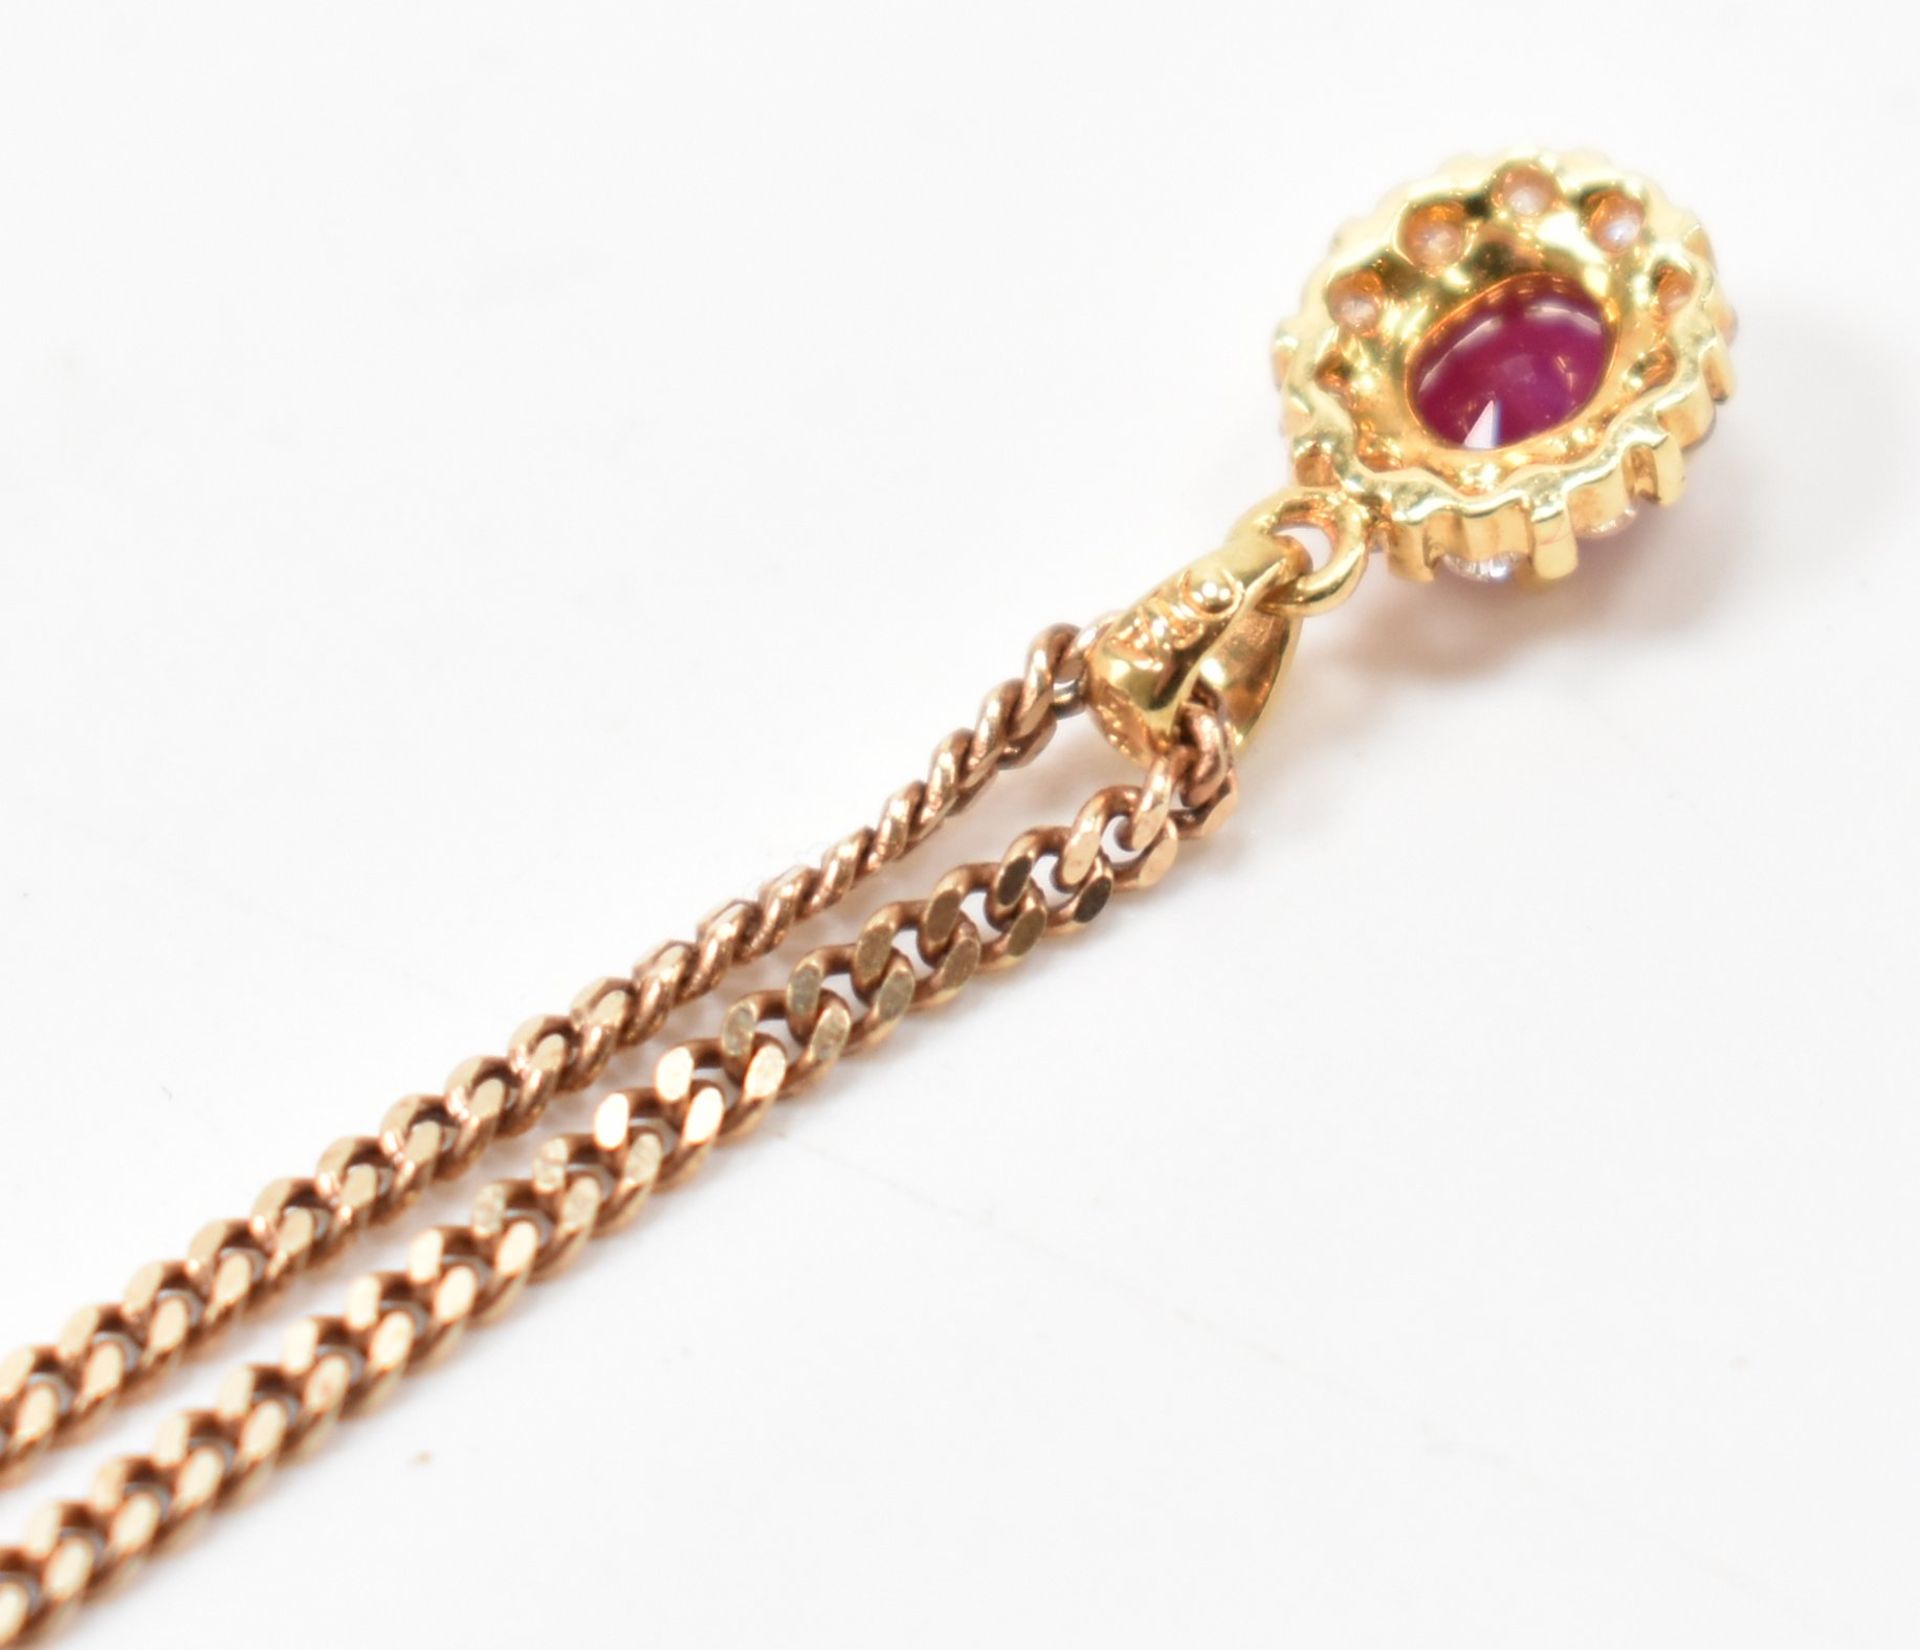 GOLD RUBY & DIAMOND PENDANT NECKLACE - Image 7 of 7